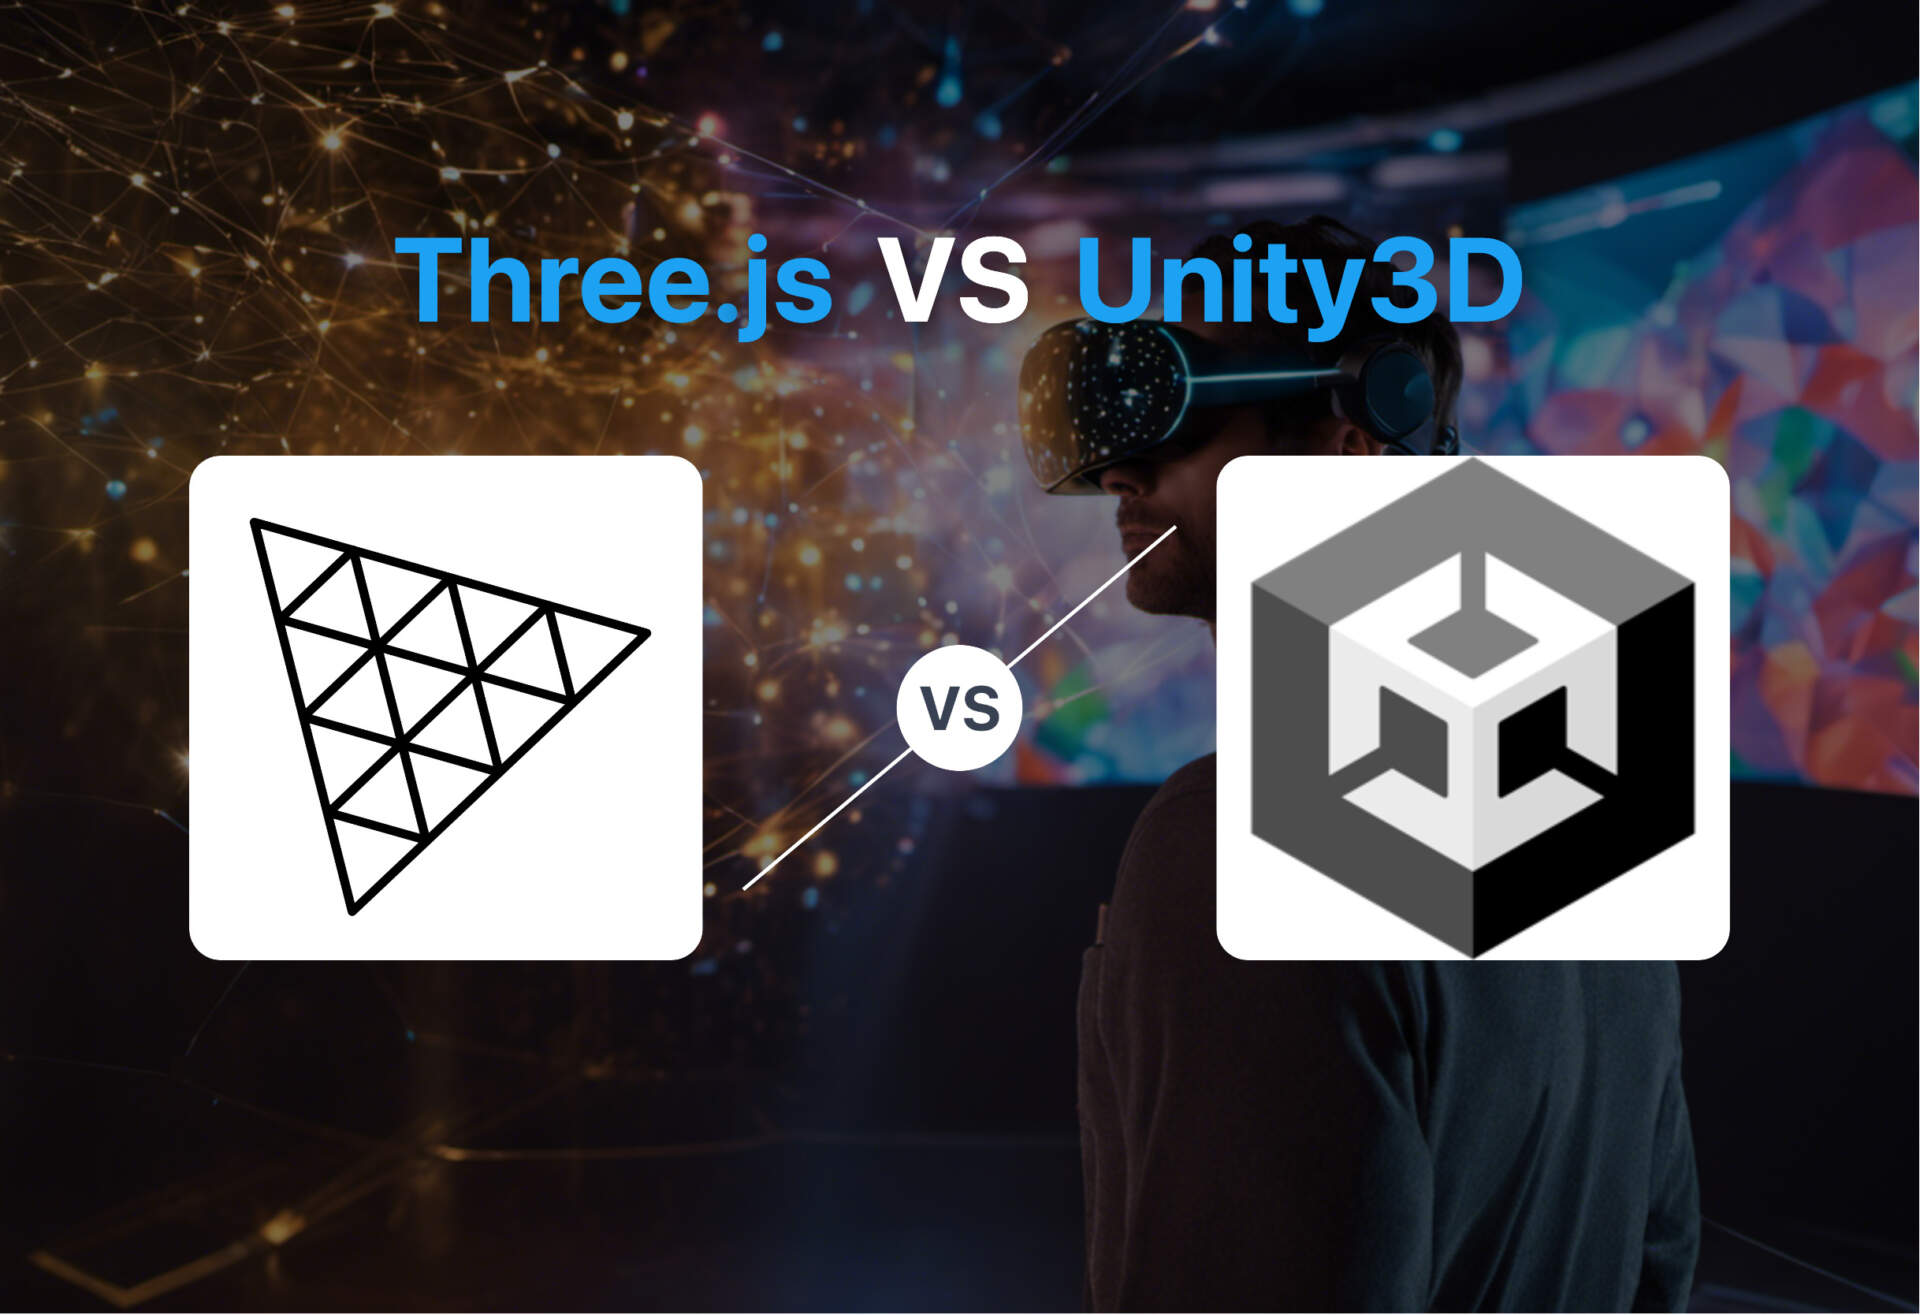 Comparison of Three.js and Unity3D